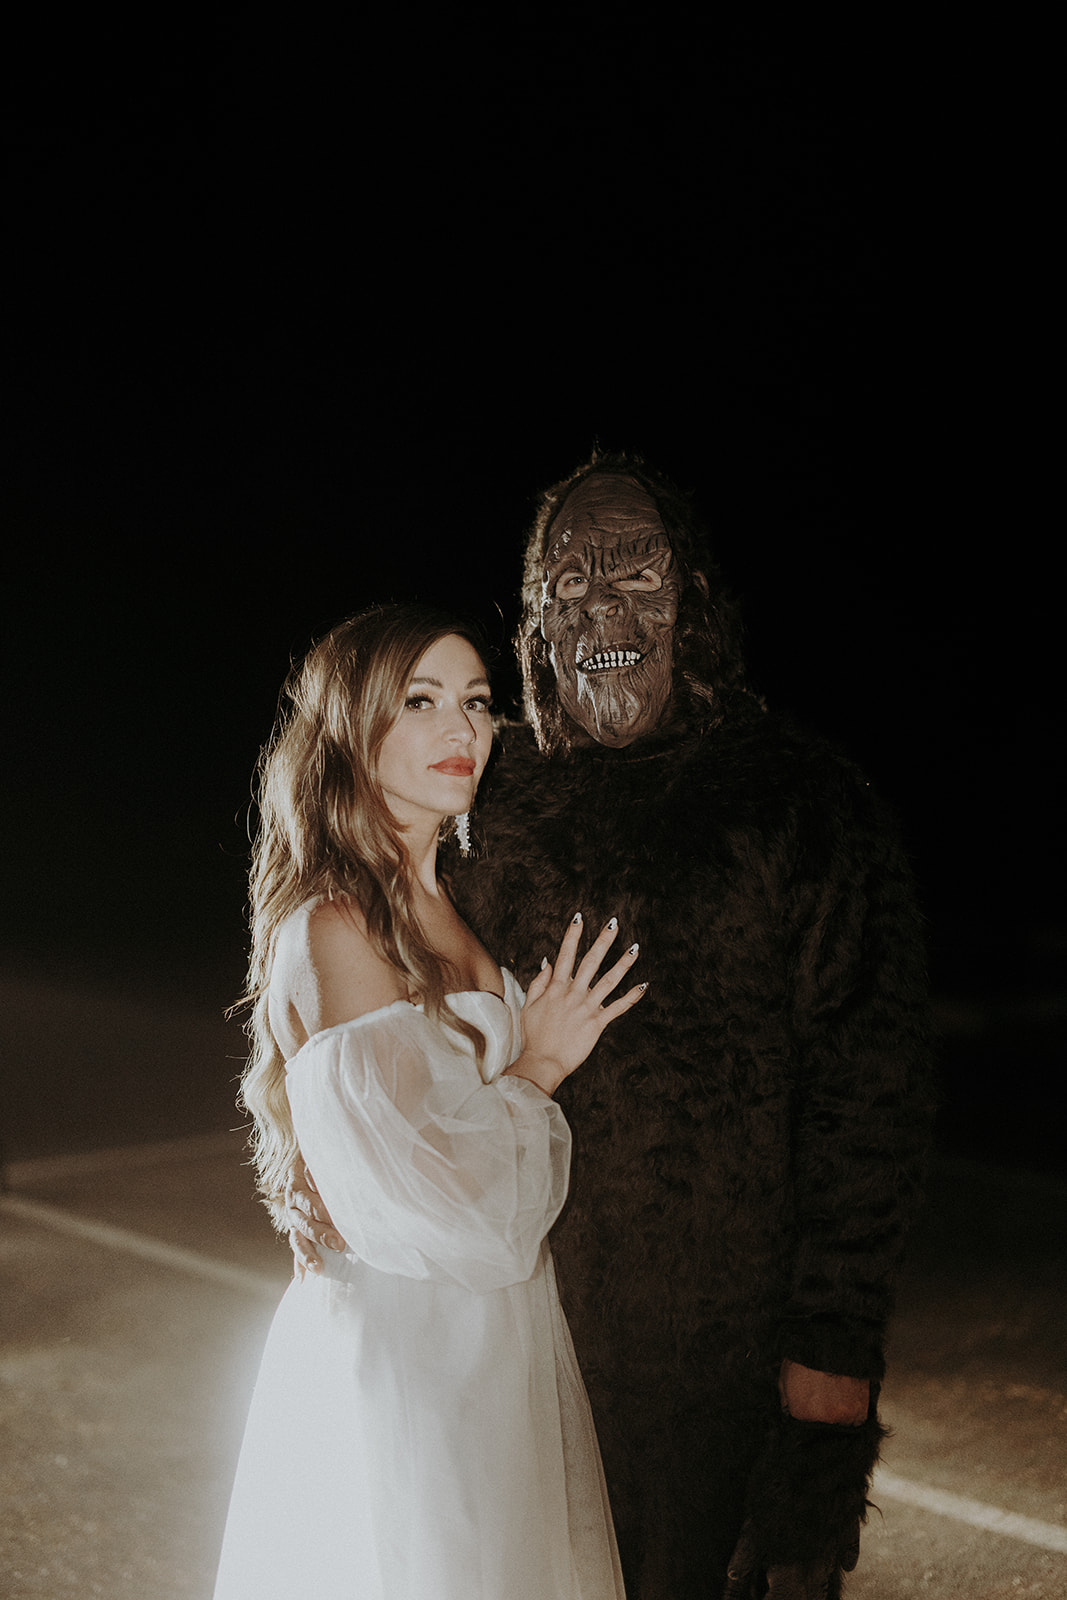 A wedding elopement couple where the groom is dressed up in a bigfoot costume.